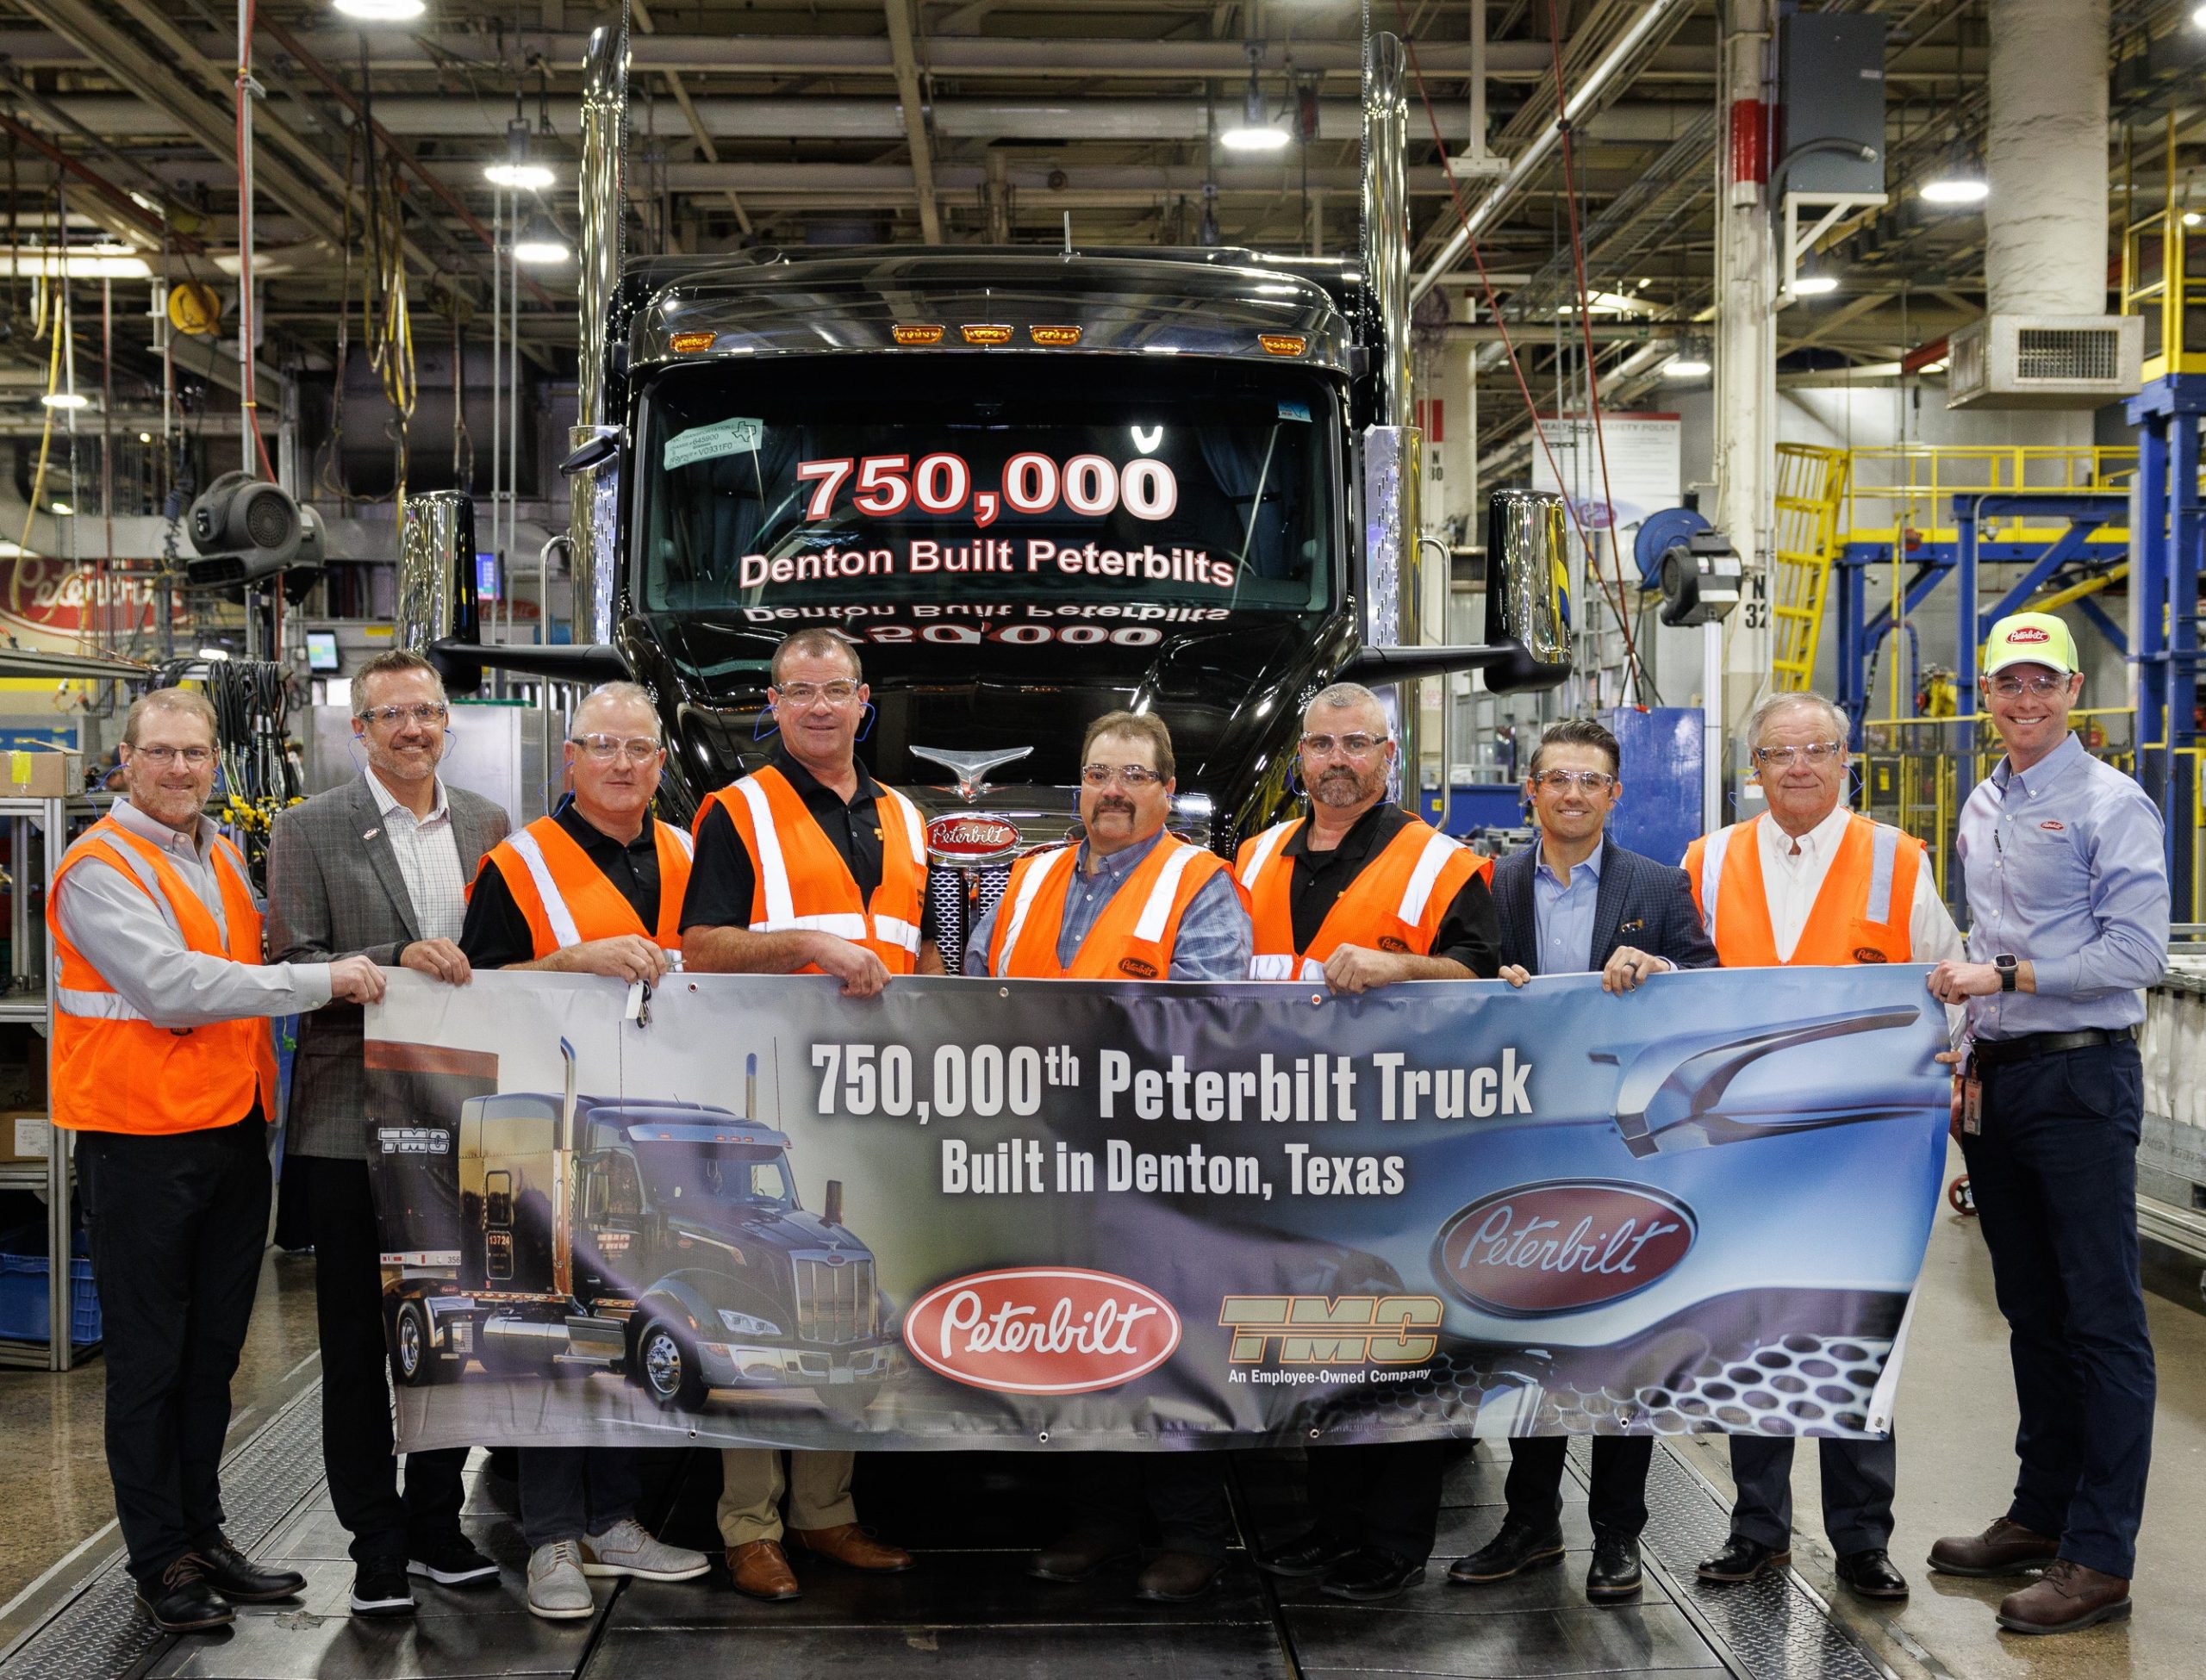 Peterbilt Celebrates the Production of its 750,000th Truck at the Denton Manufacturing Facility